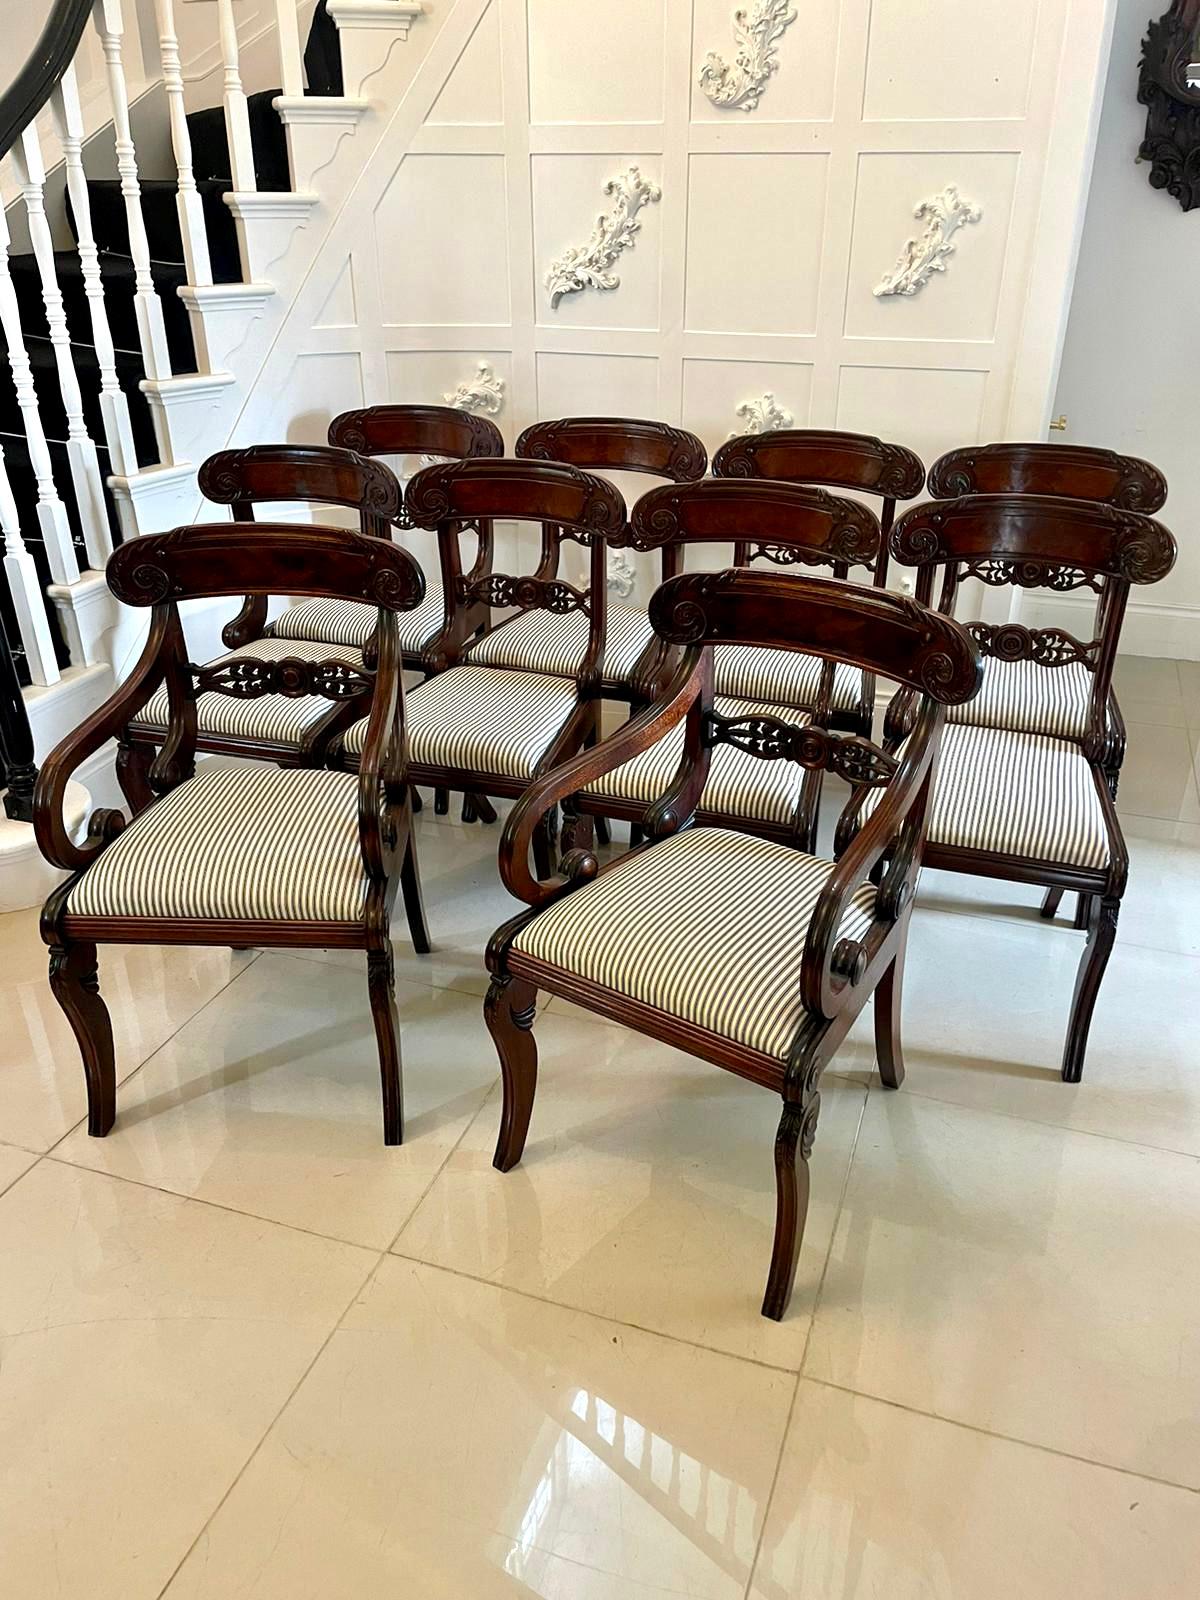 Fine set of 10 antique regency quality carved mahogany dining chairs consisting of 2 elbow chairs and 8 single chairs having a quality figured mahogany top rail with carved scrolls carved centre splat the elbow chairs having reeded scroll shape open